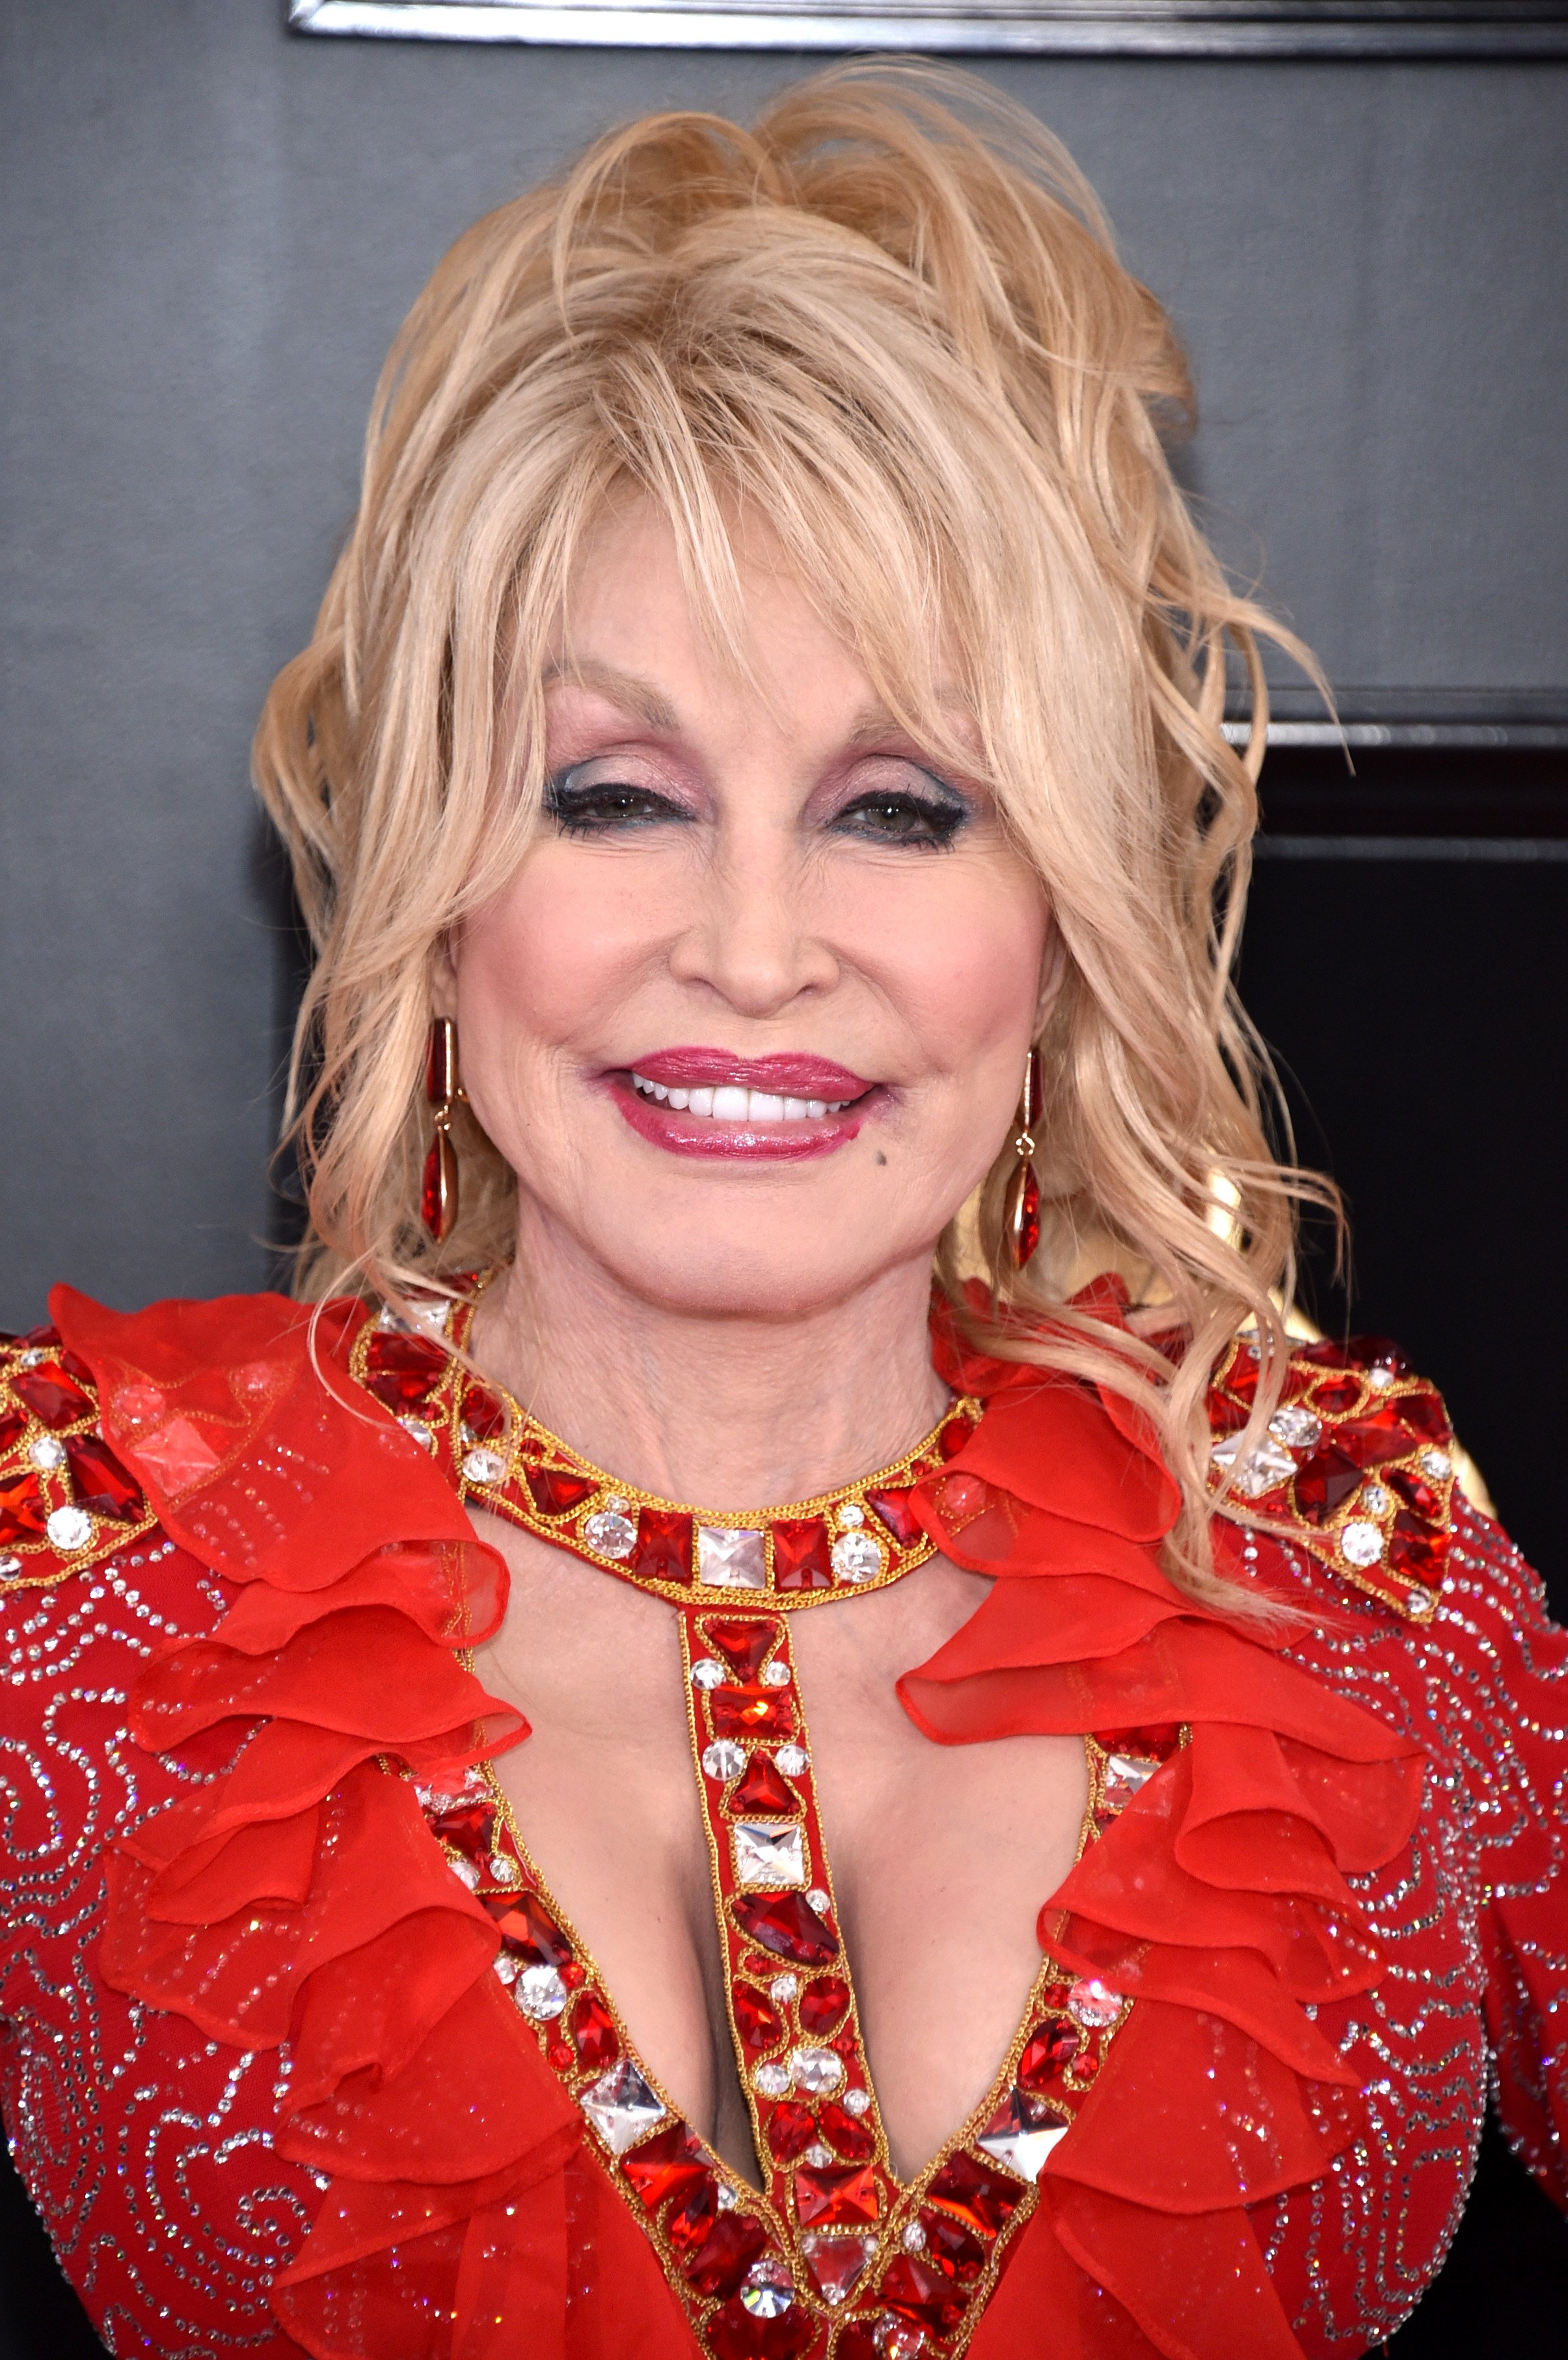 Dolly Parton attends the 61st Annual GRAMMY Awards on February 10, 2019, in Los Angeles, California. | Source: Getty Images.